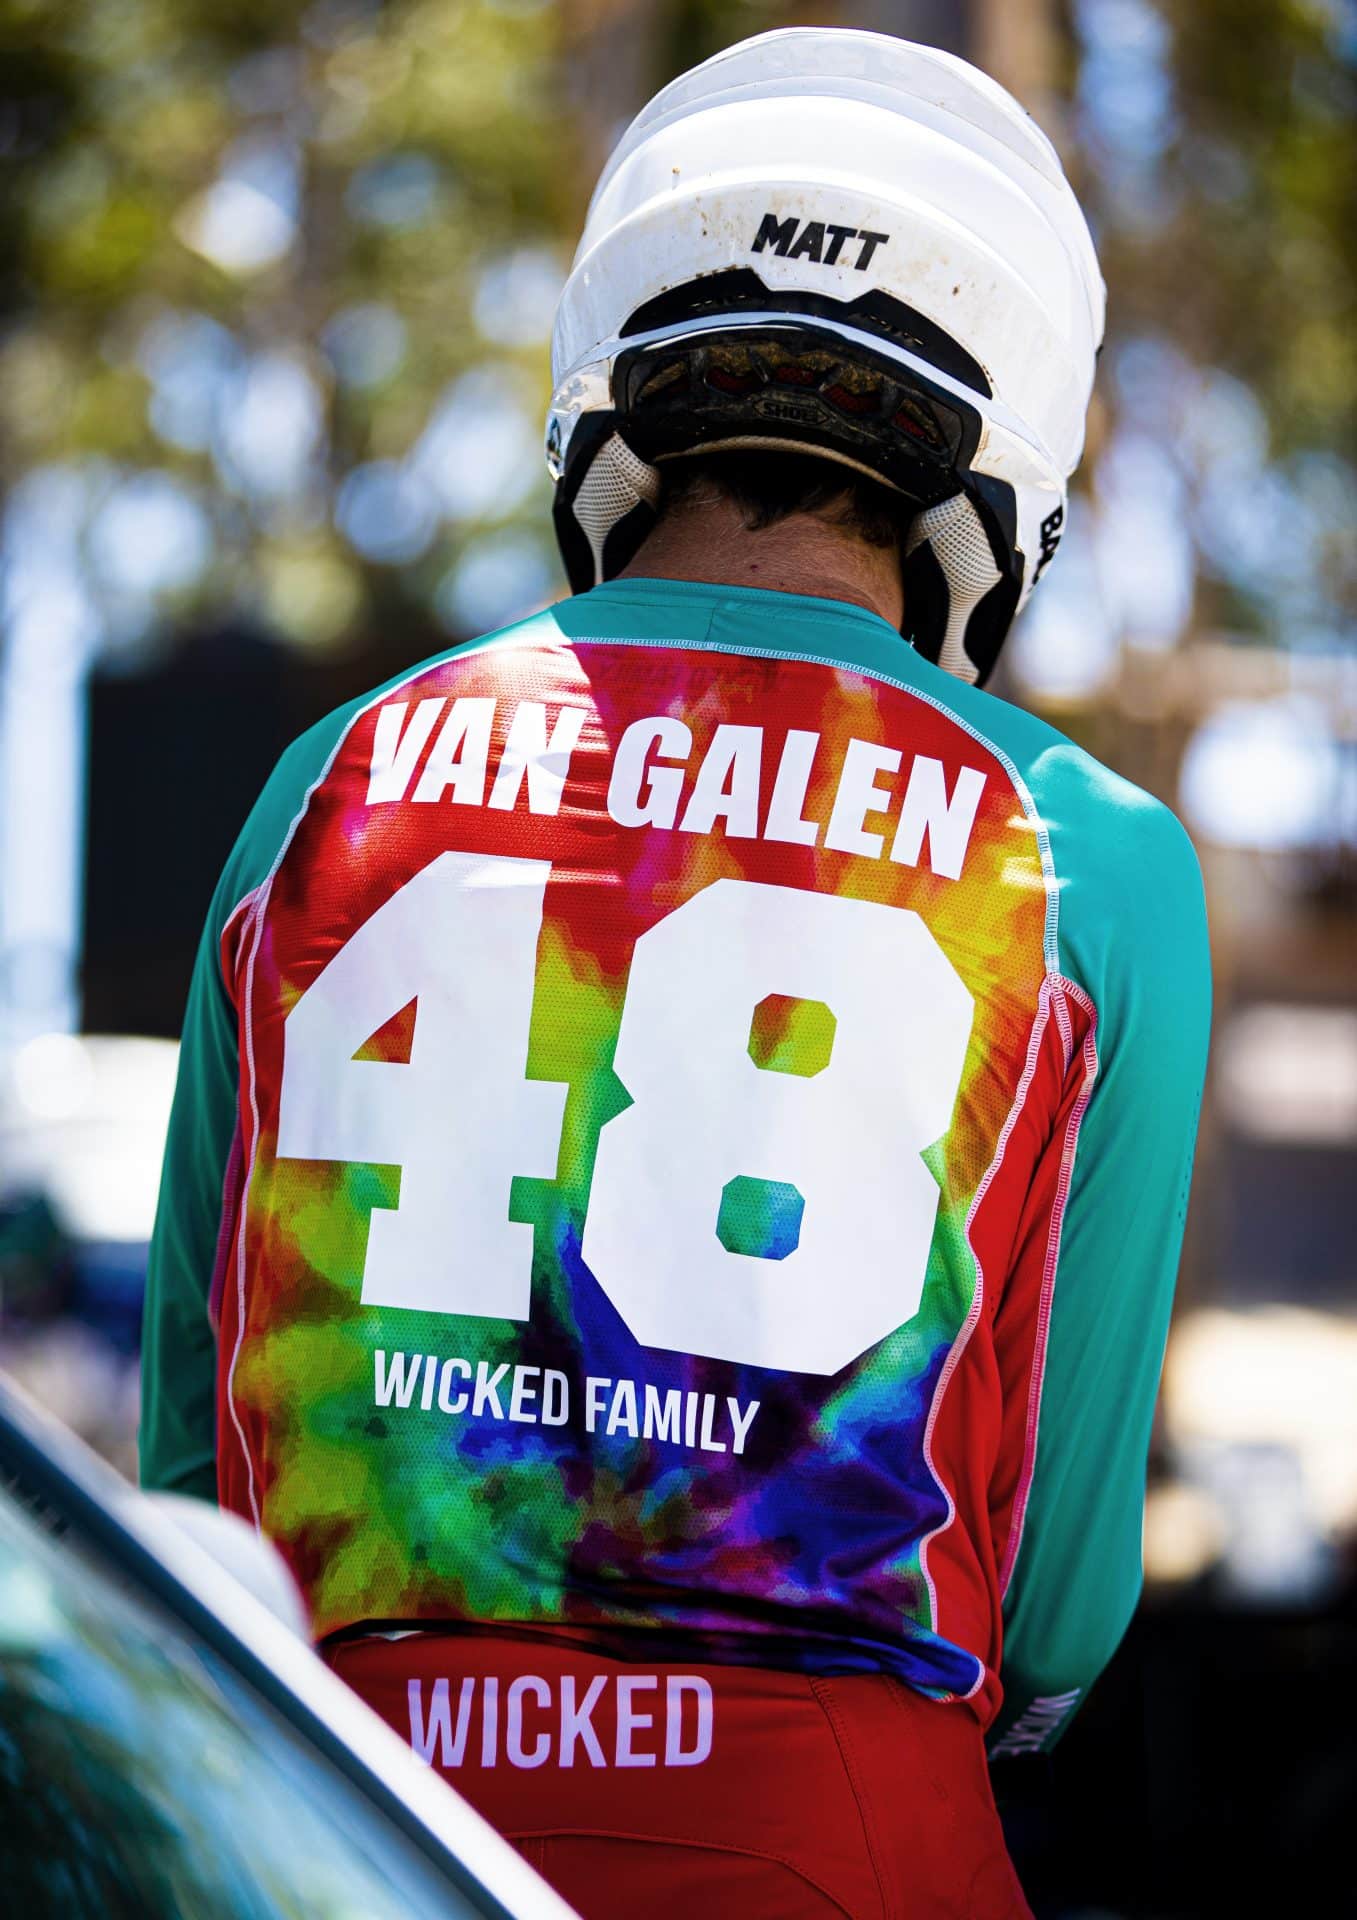 Mx rider in a tiedye jersey with ID kit on the back